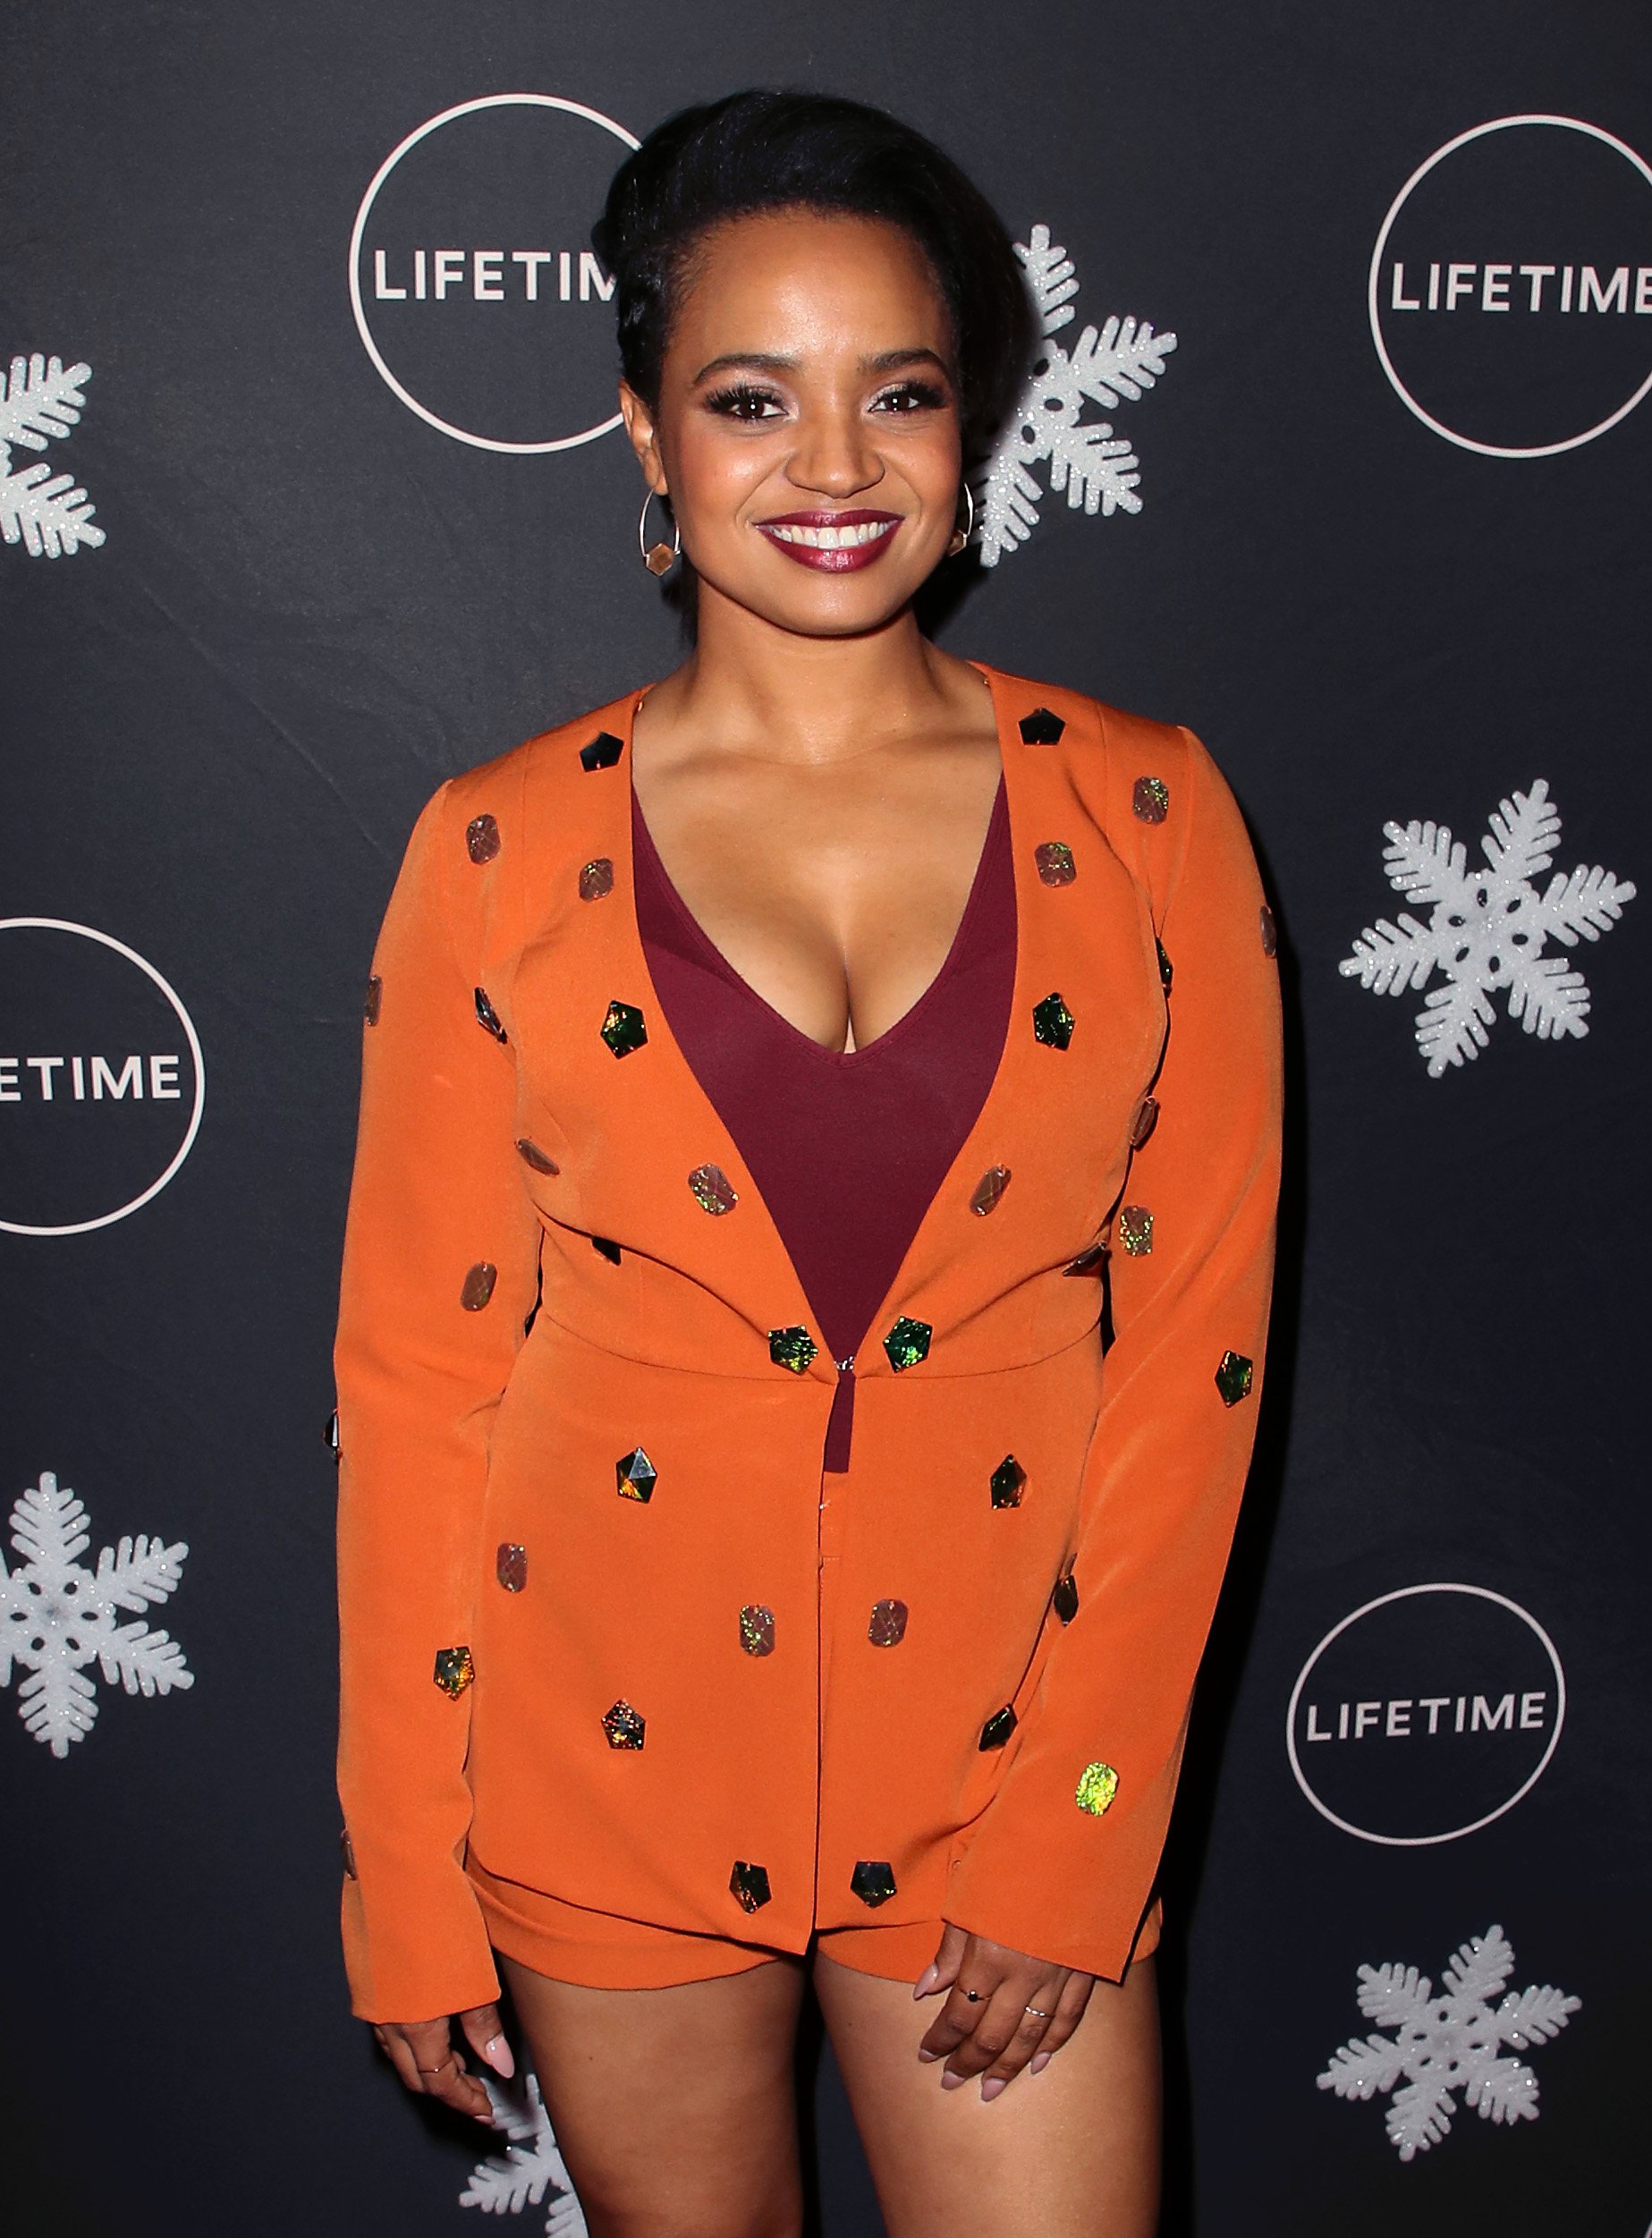 Kyla Pratt at the "It's A Wonderful Lifetime" Holiday Party at STK Los Angeles on October 22, 2019 in Los Angeles, California. | Source: Getty Images